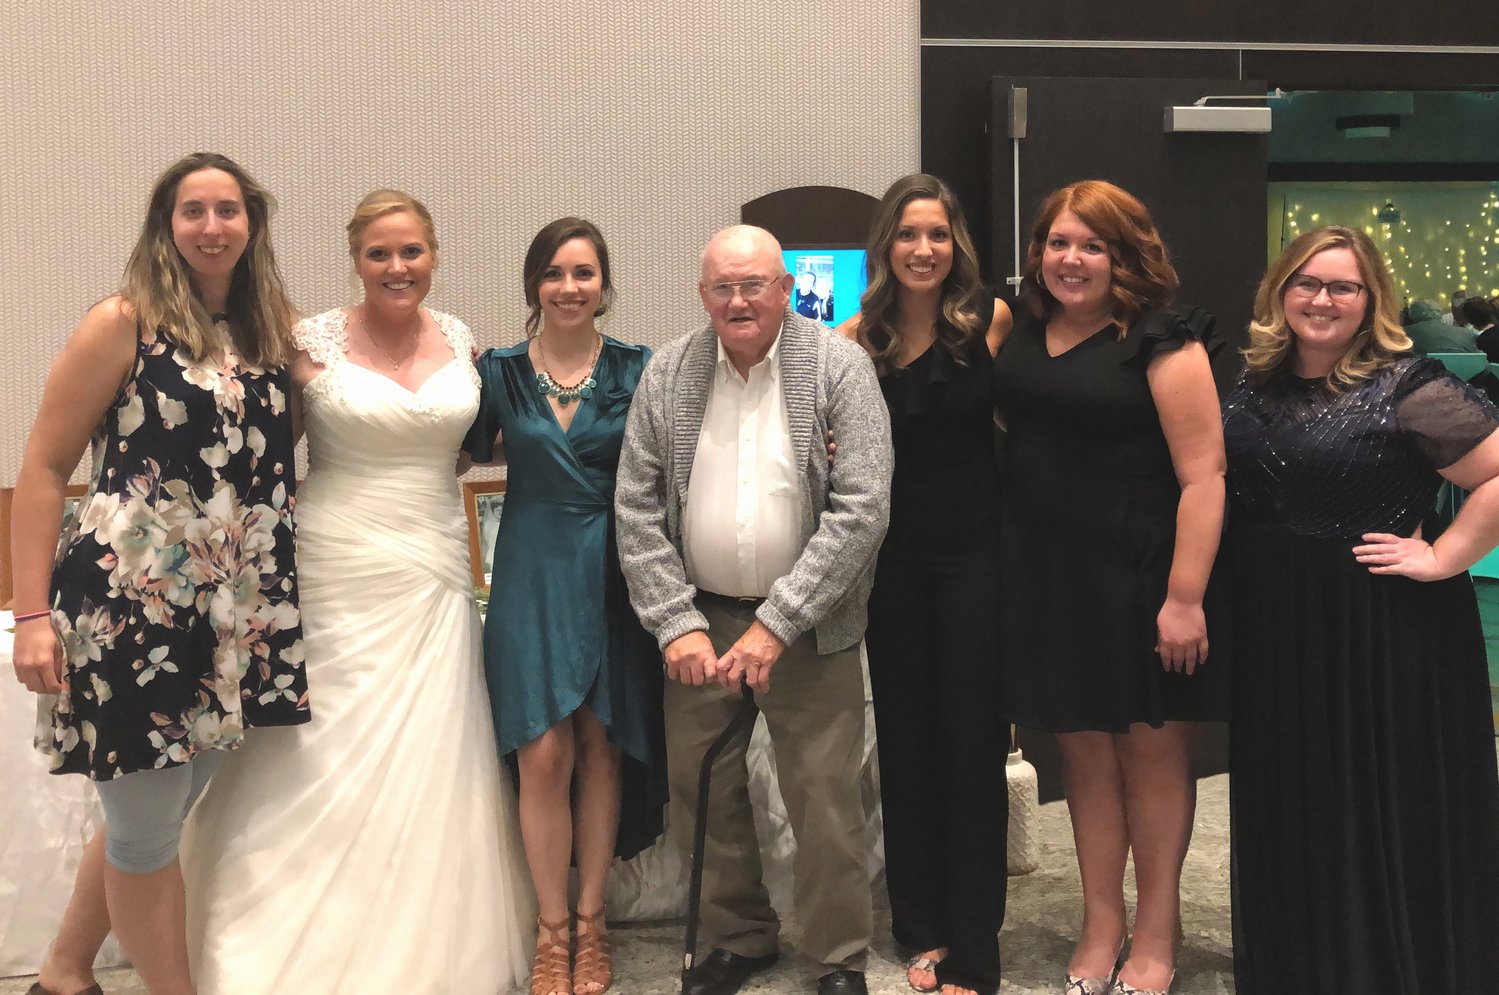 Members of the Charger tennis program gather at Shannon Joyce's wedding. From L-R: Kelly (Kyle) Kidd, Shannon (Joyce) Collier, Abby Williams, Bob Nabors, Samantha (Storms) Sells, Sarah Storms, and Emily Williams.